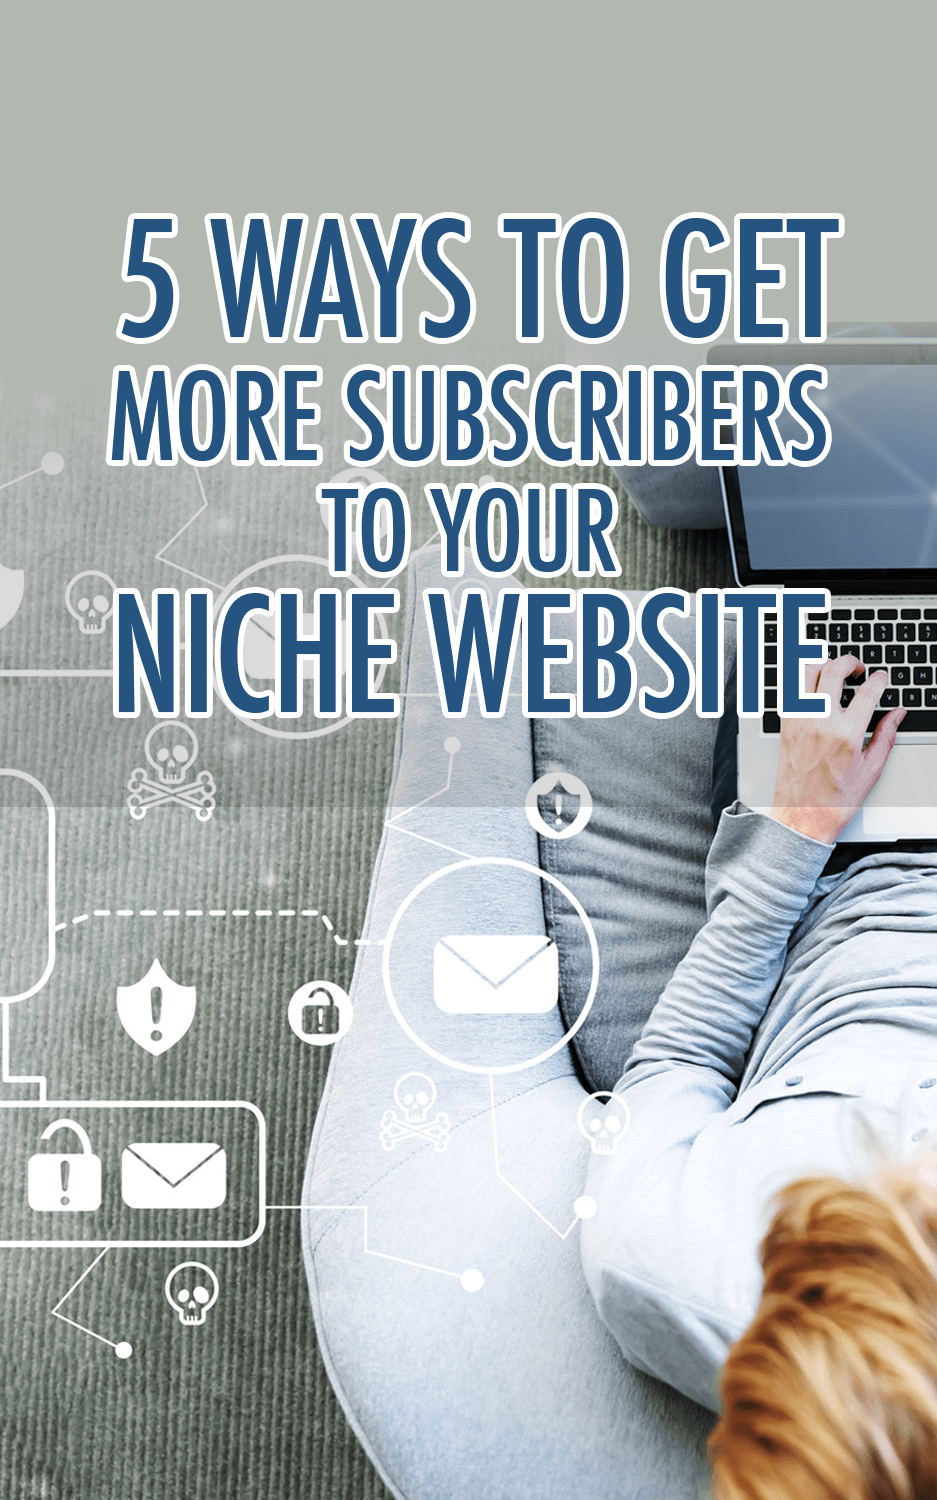 5 Ways To Get More Subscribers To Your Niche Website!